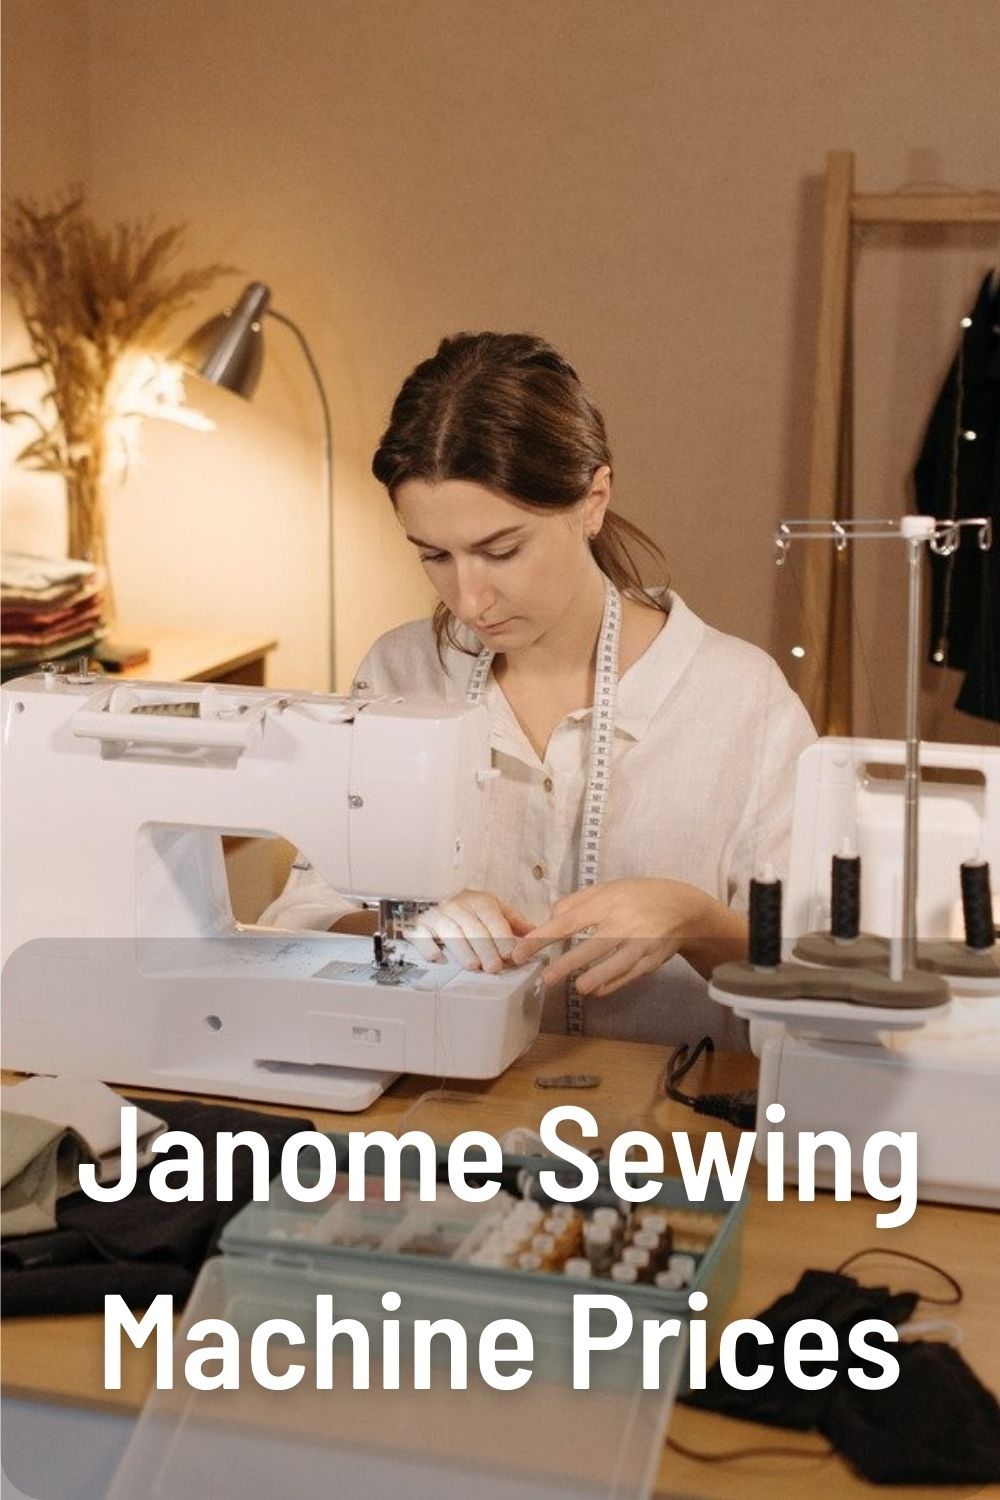 Janome Sewing Machine Prices